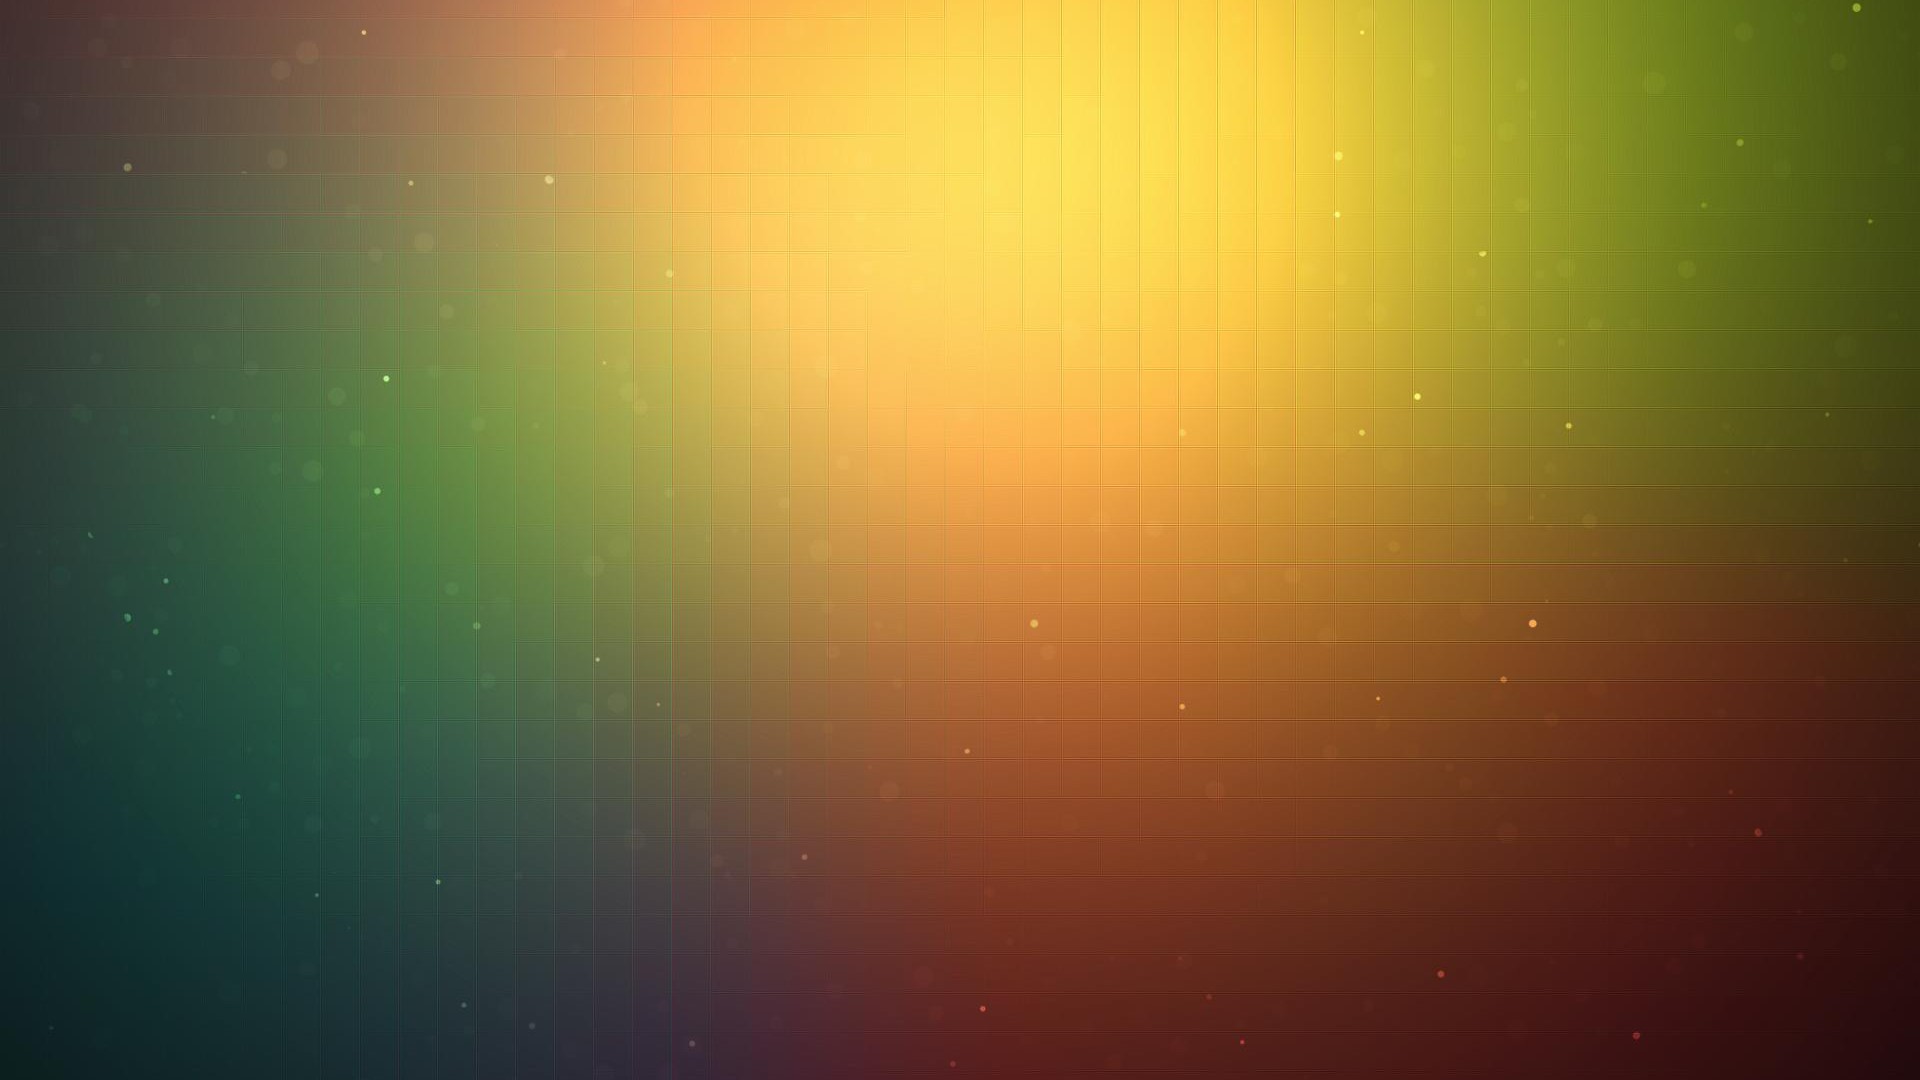 1920x1080 Simple Background For Walls http://www.hdwallpaperspop.com/simple-